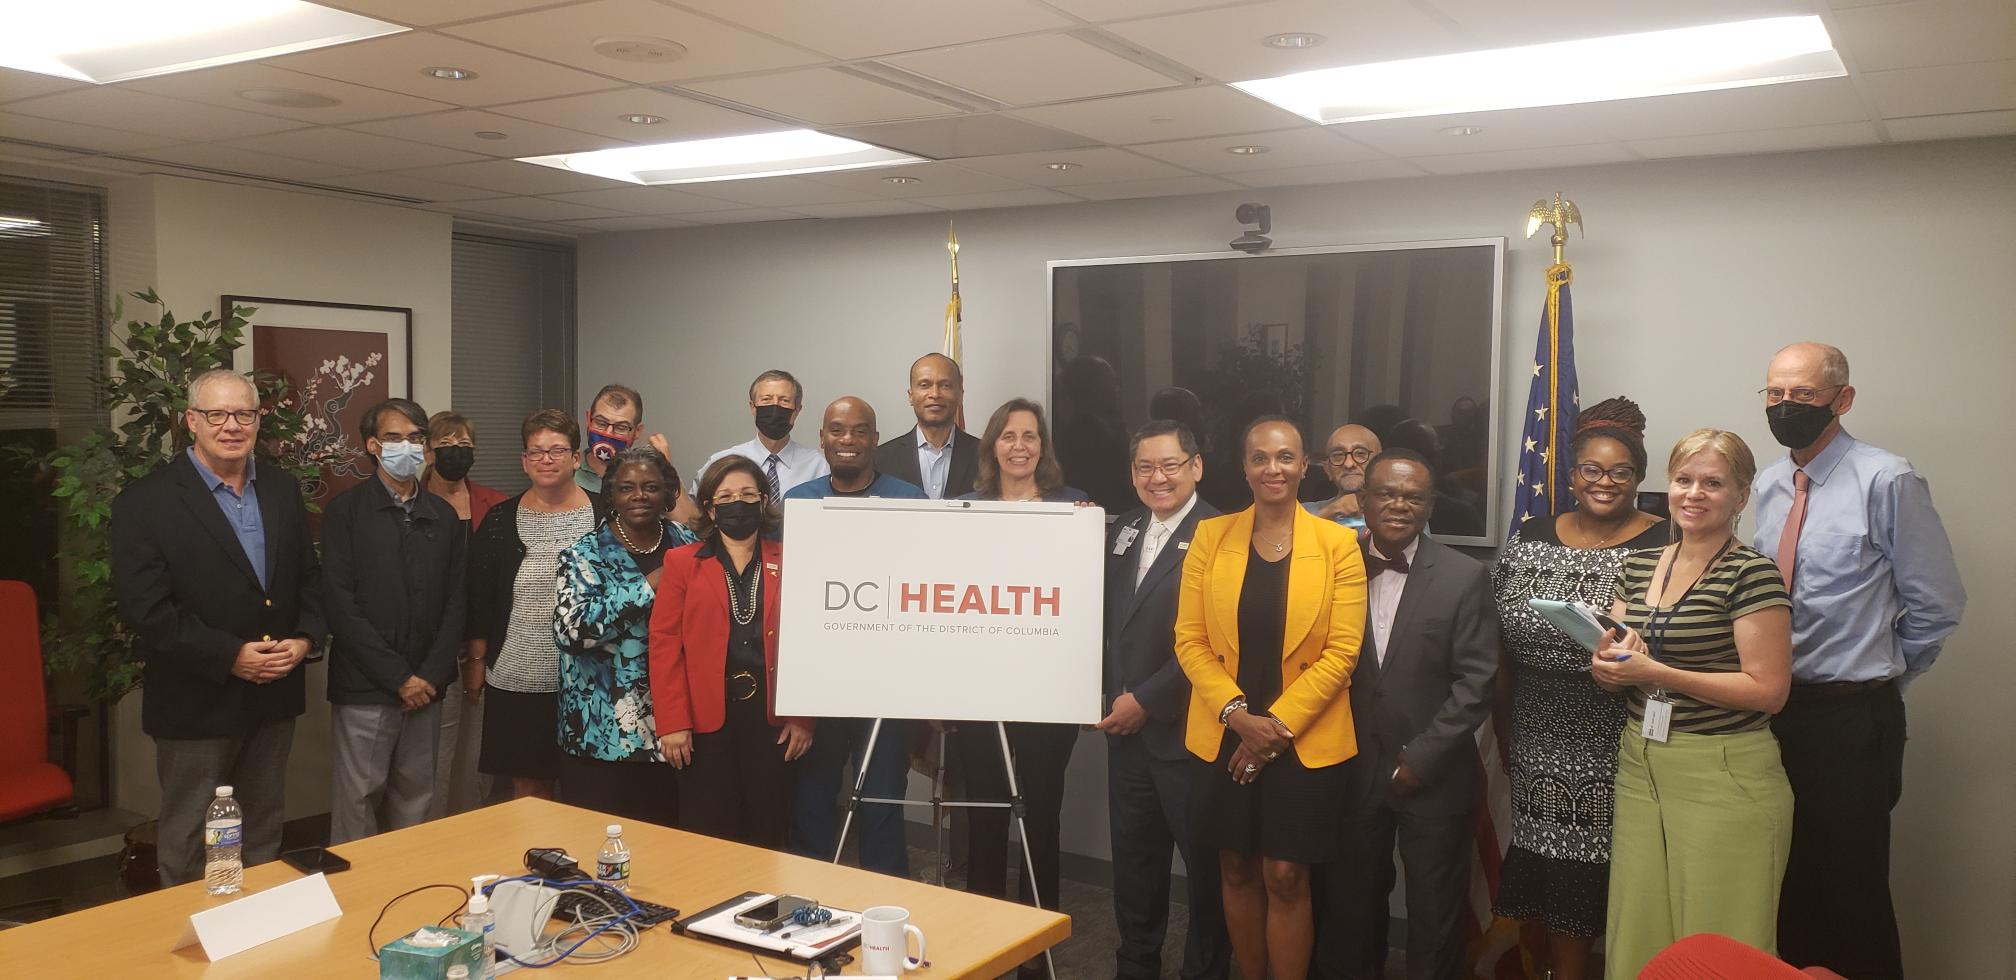 DC Health and MSDC leaders